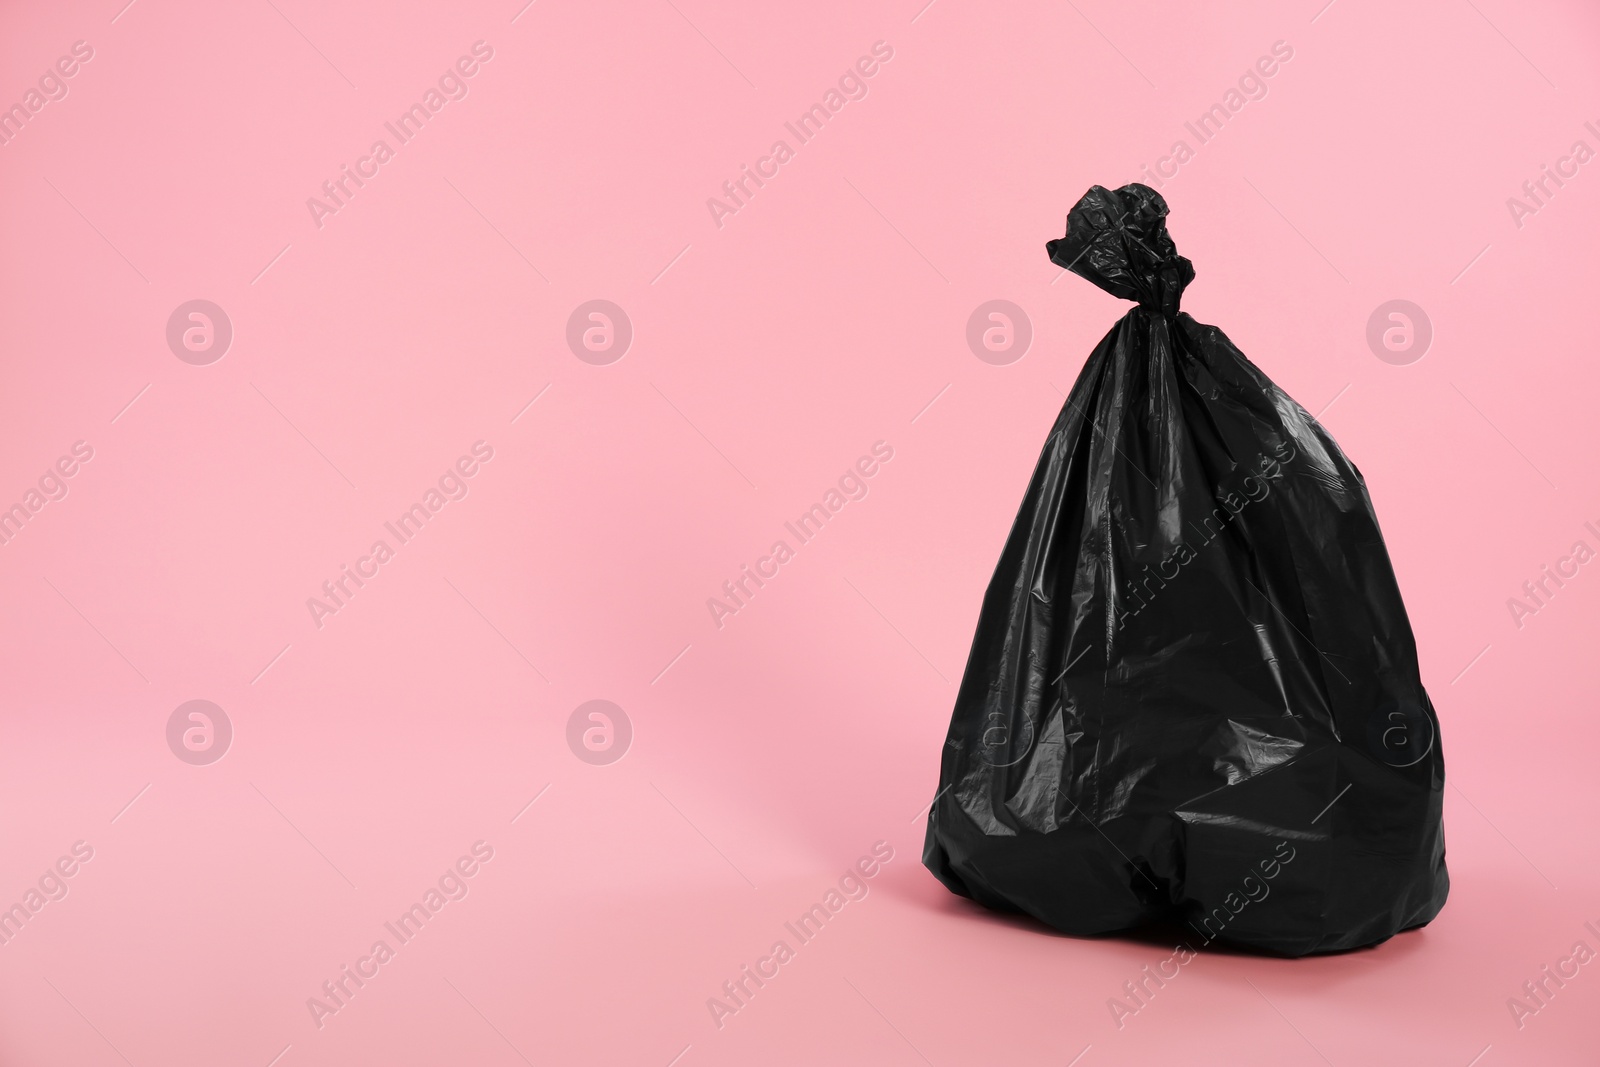 Photo of Trash bag full of garbage on pink background. Space for text